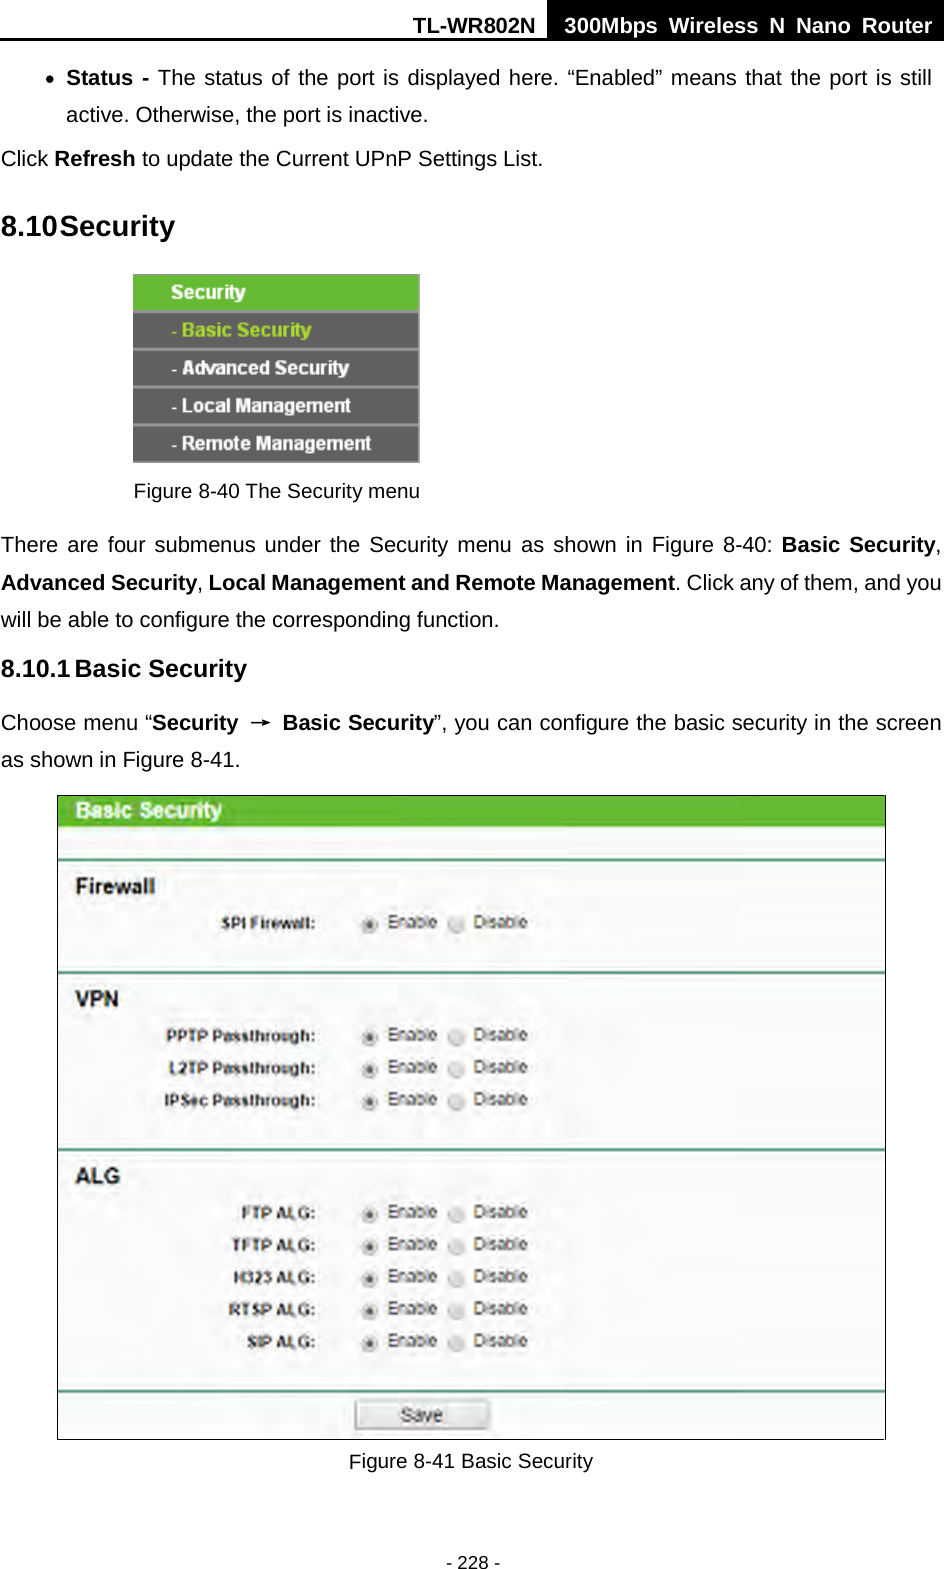 TL-WR802N  300Mbps Wireless N Nano Router  • Status - The status of the port is displayed here. “Enabled” means that the port is still active. Otherwise, the port is inactive. Click Refresh to update the Current UPnP Settings List.   8.10 Security  Figure 8-40 The Security menu There are four submenus under the Security menu as shown in Figure 8-40: Basic Security, Advanced Security, Local Management and Remote Management. Click any of them, and you will be able to configure the corresponding function. 8.10.1 Basic Security Choose menu “Security  → Basic Security”, you can configure the basic security in the screen as shown in Figure 8-41.  Figure 8-41 Basic Security - 228 - 